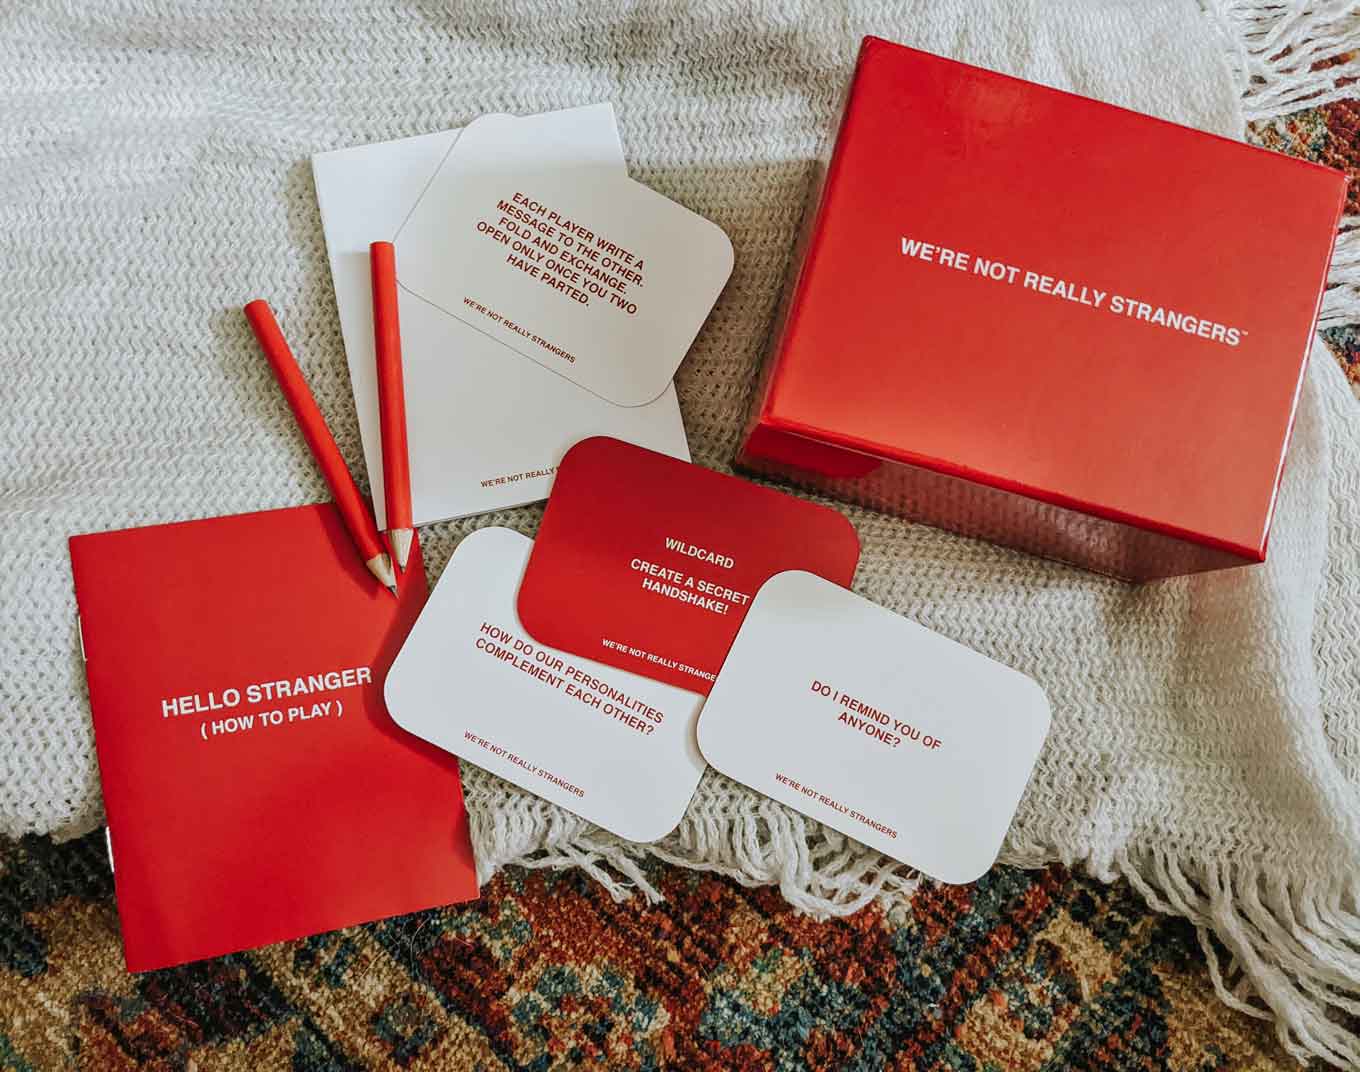 Red and white card deck that says "We're Not Really Strangers" with a red pencil and paper